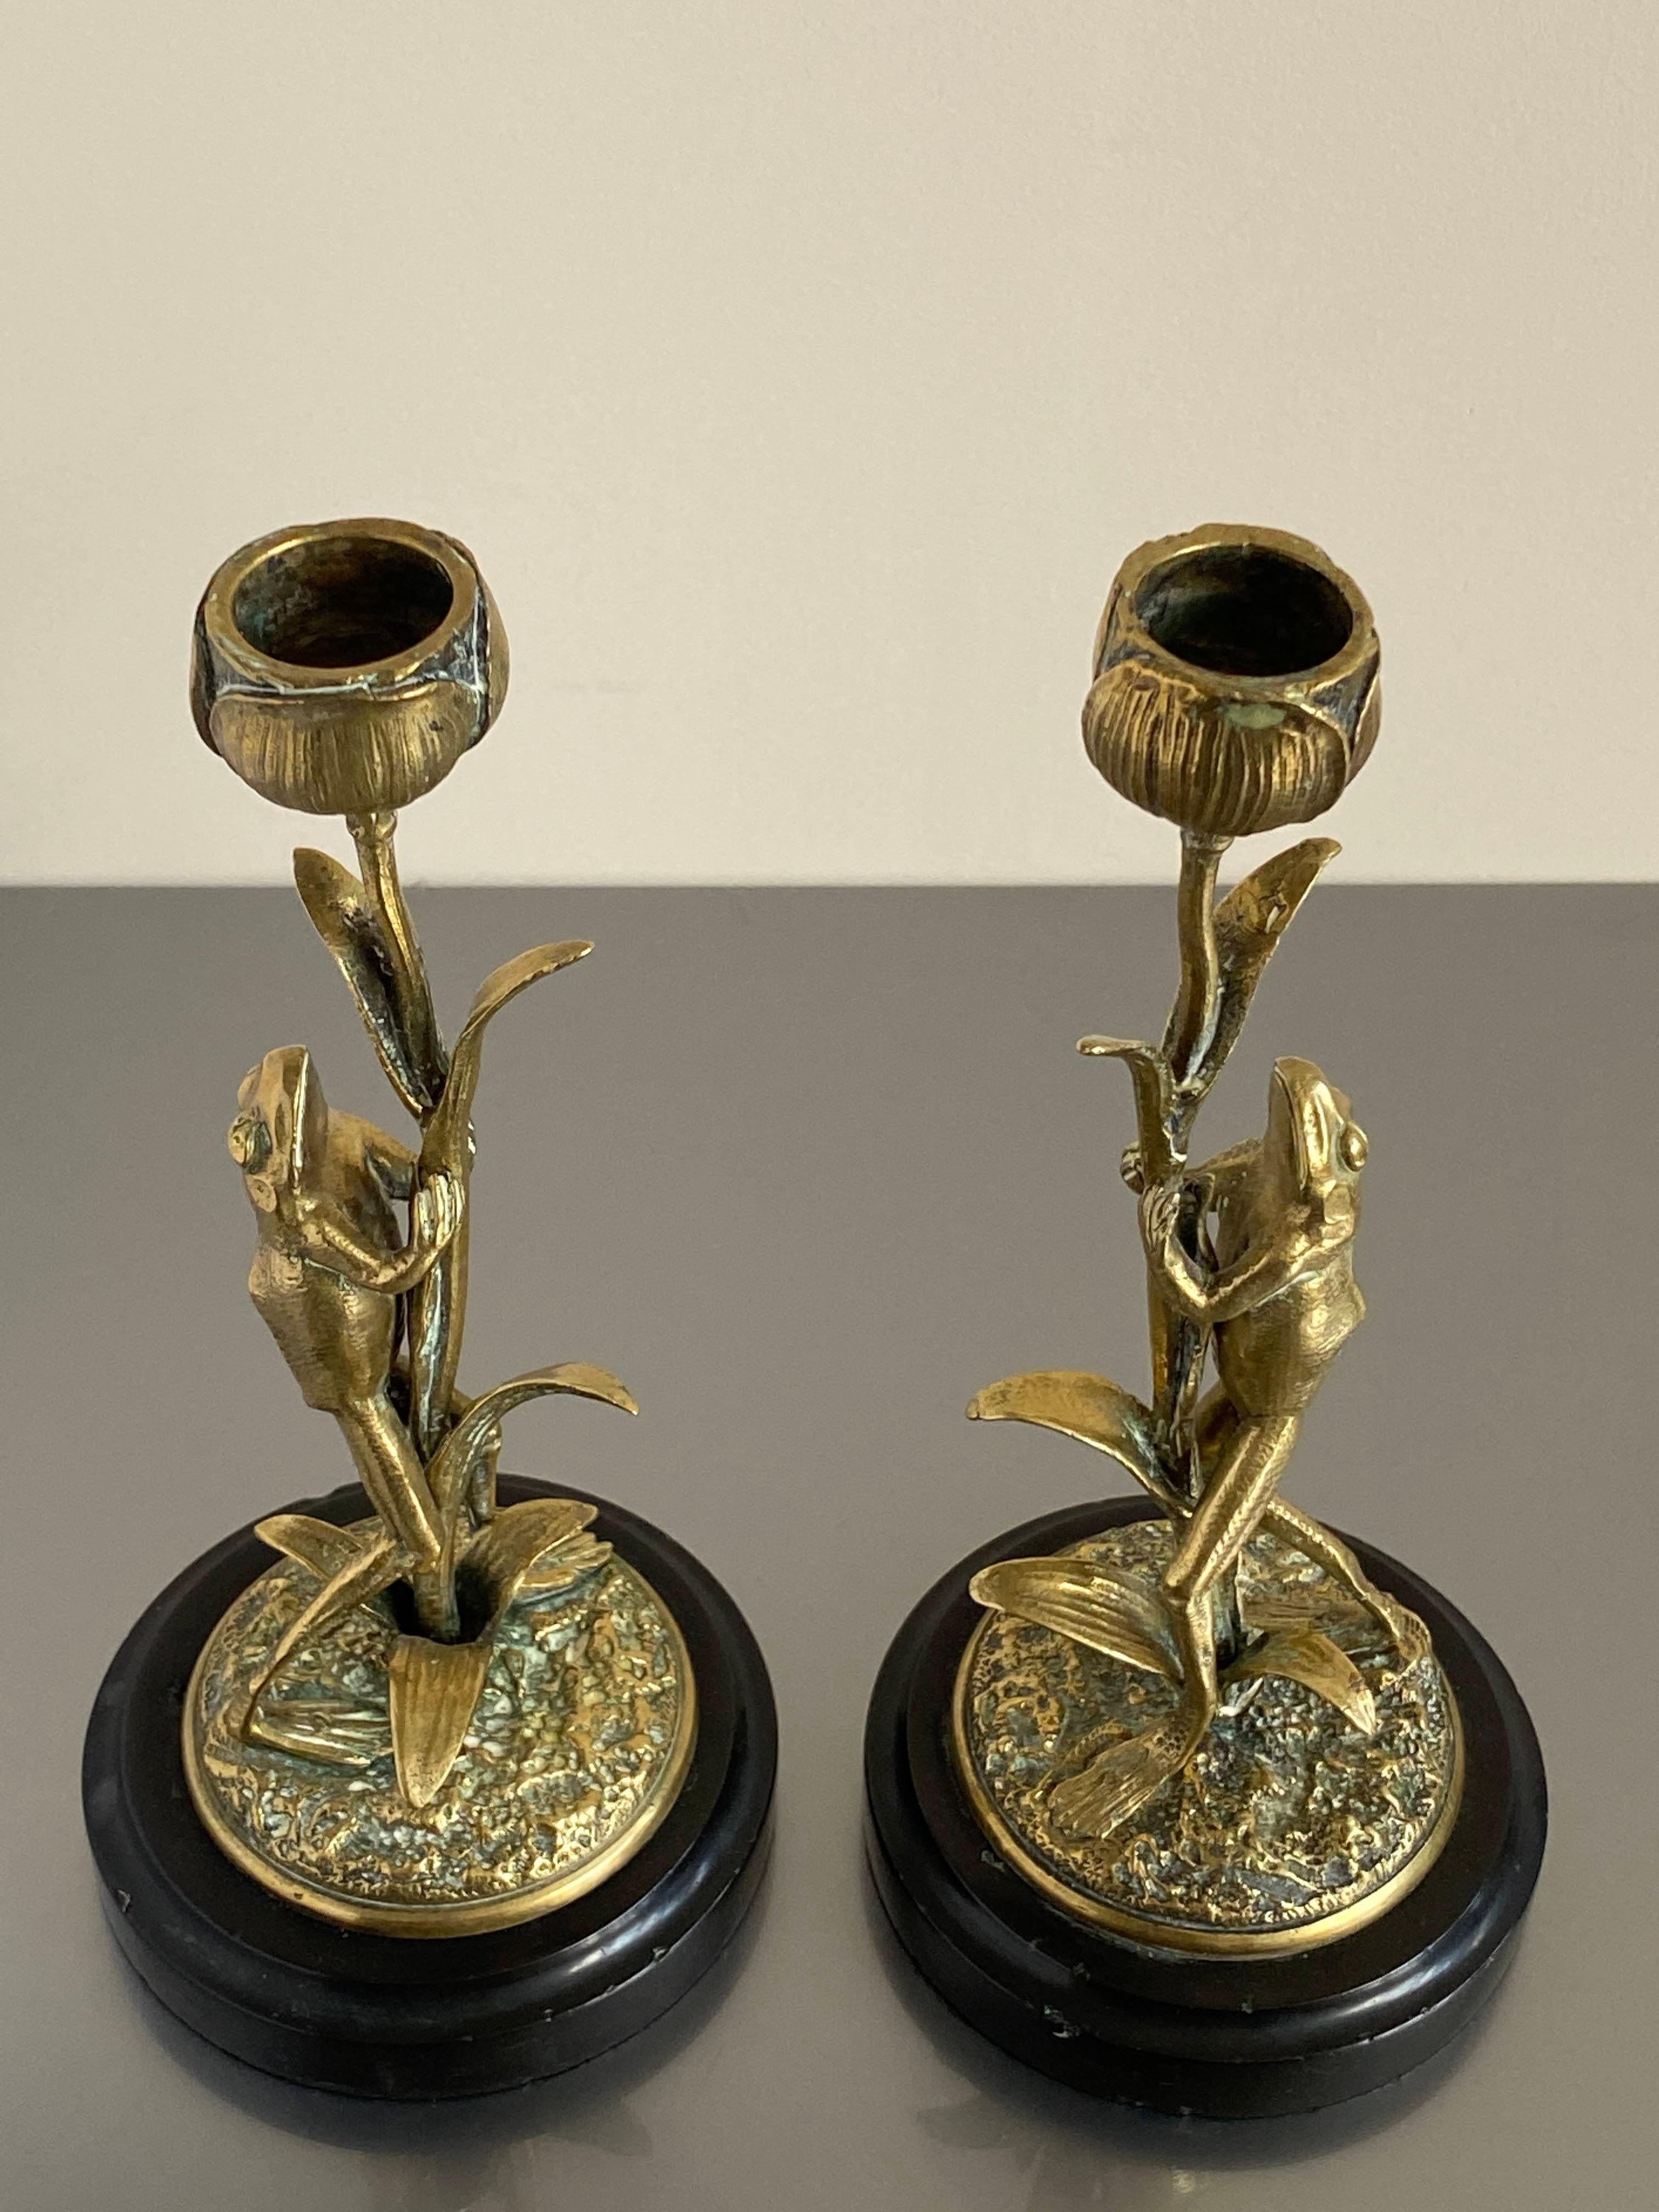 Cast Art Nouveau Pair of Brass Candle Sticks Modelled as Frogs Climbing Lotus Flowers